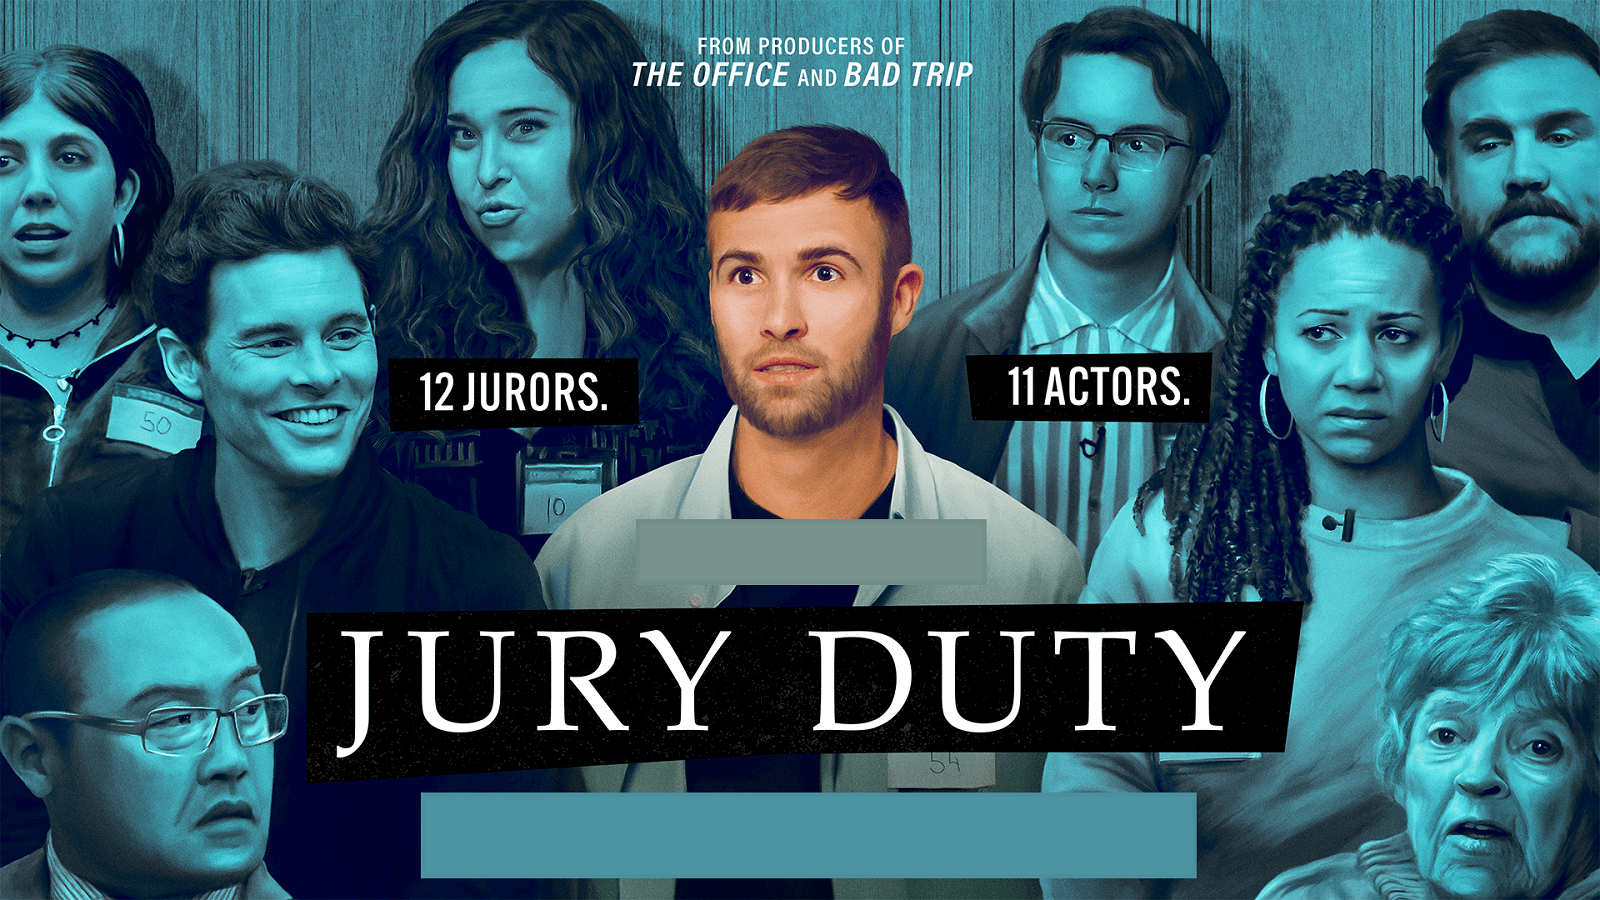 How to Watch Jury Duty Online Free: Stream Episode 5 & 6 from Anywhere